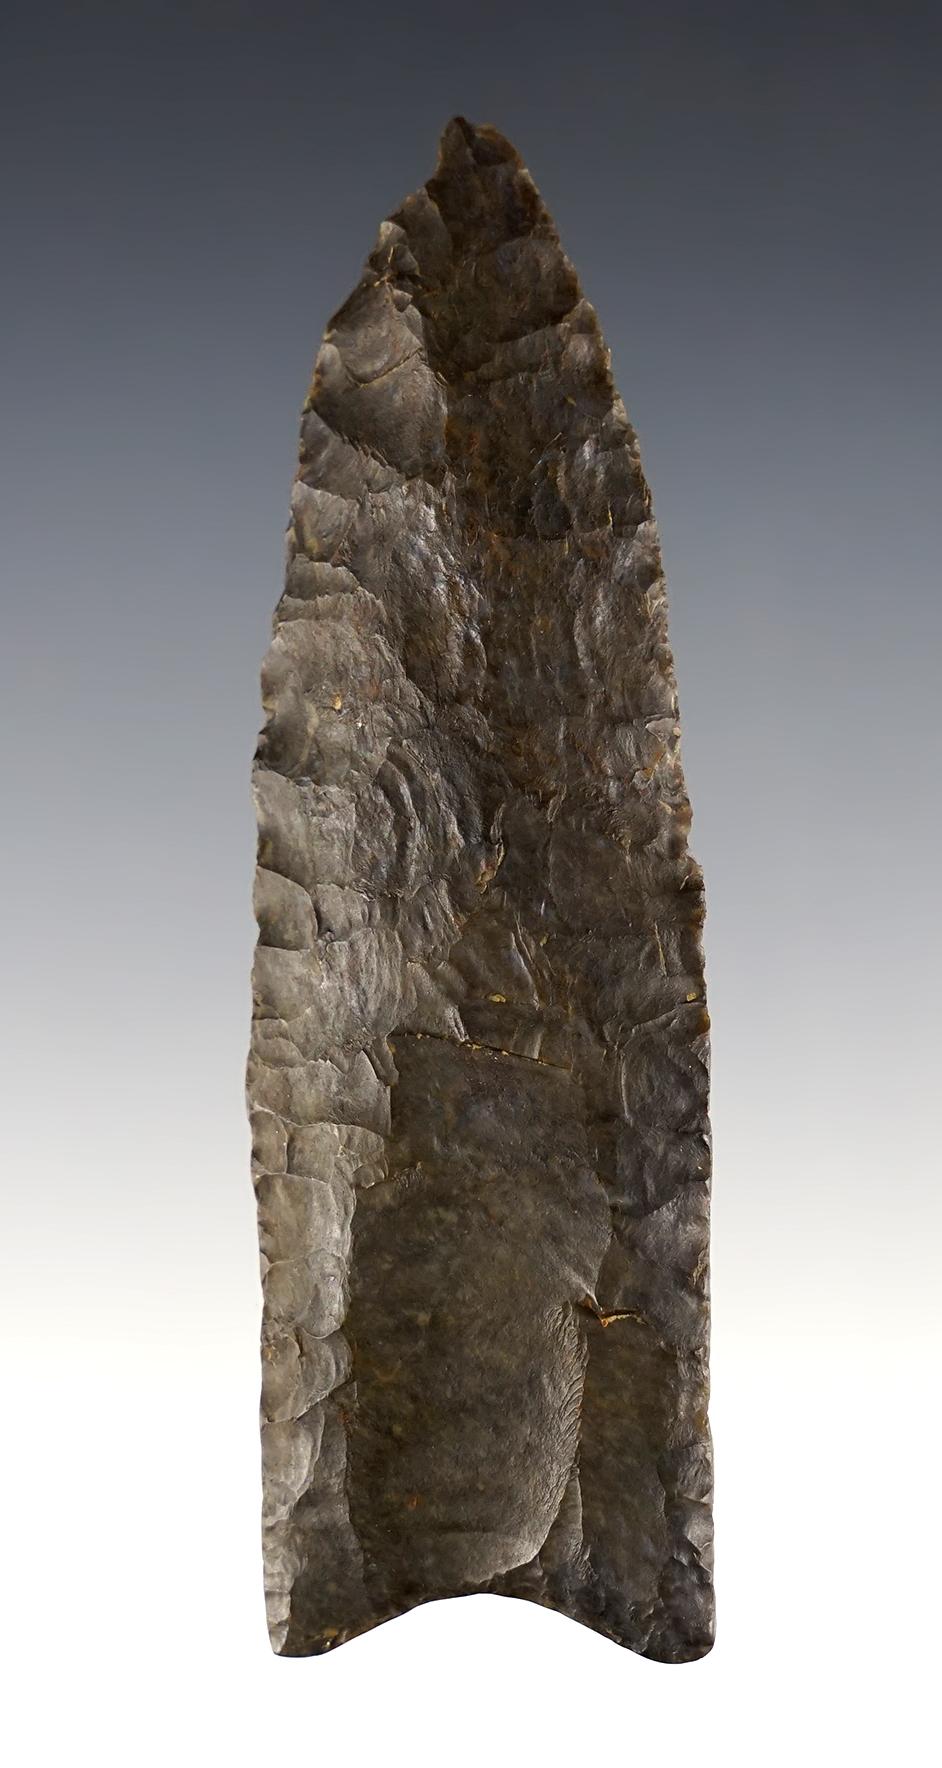 Classic 3 5/8" Fluted Paleo Clovis found in Collins, Whitley Co., Indiana. Heavy ancient grinding.